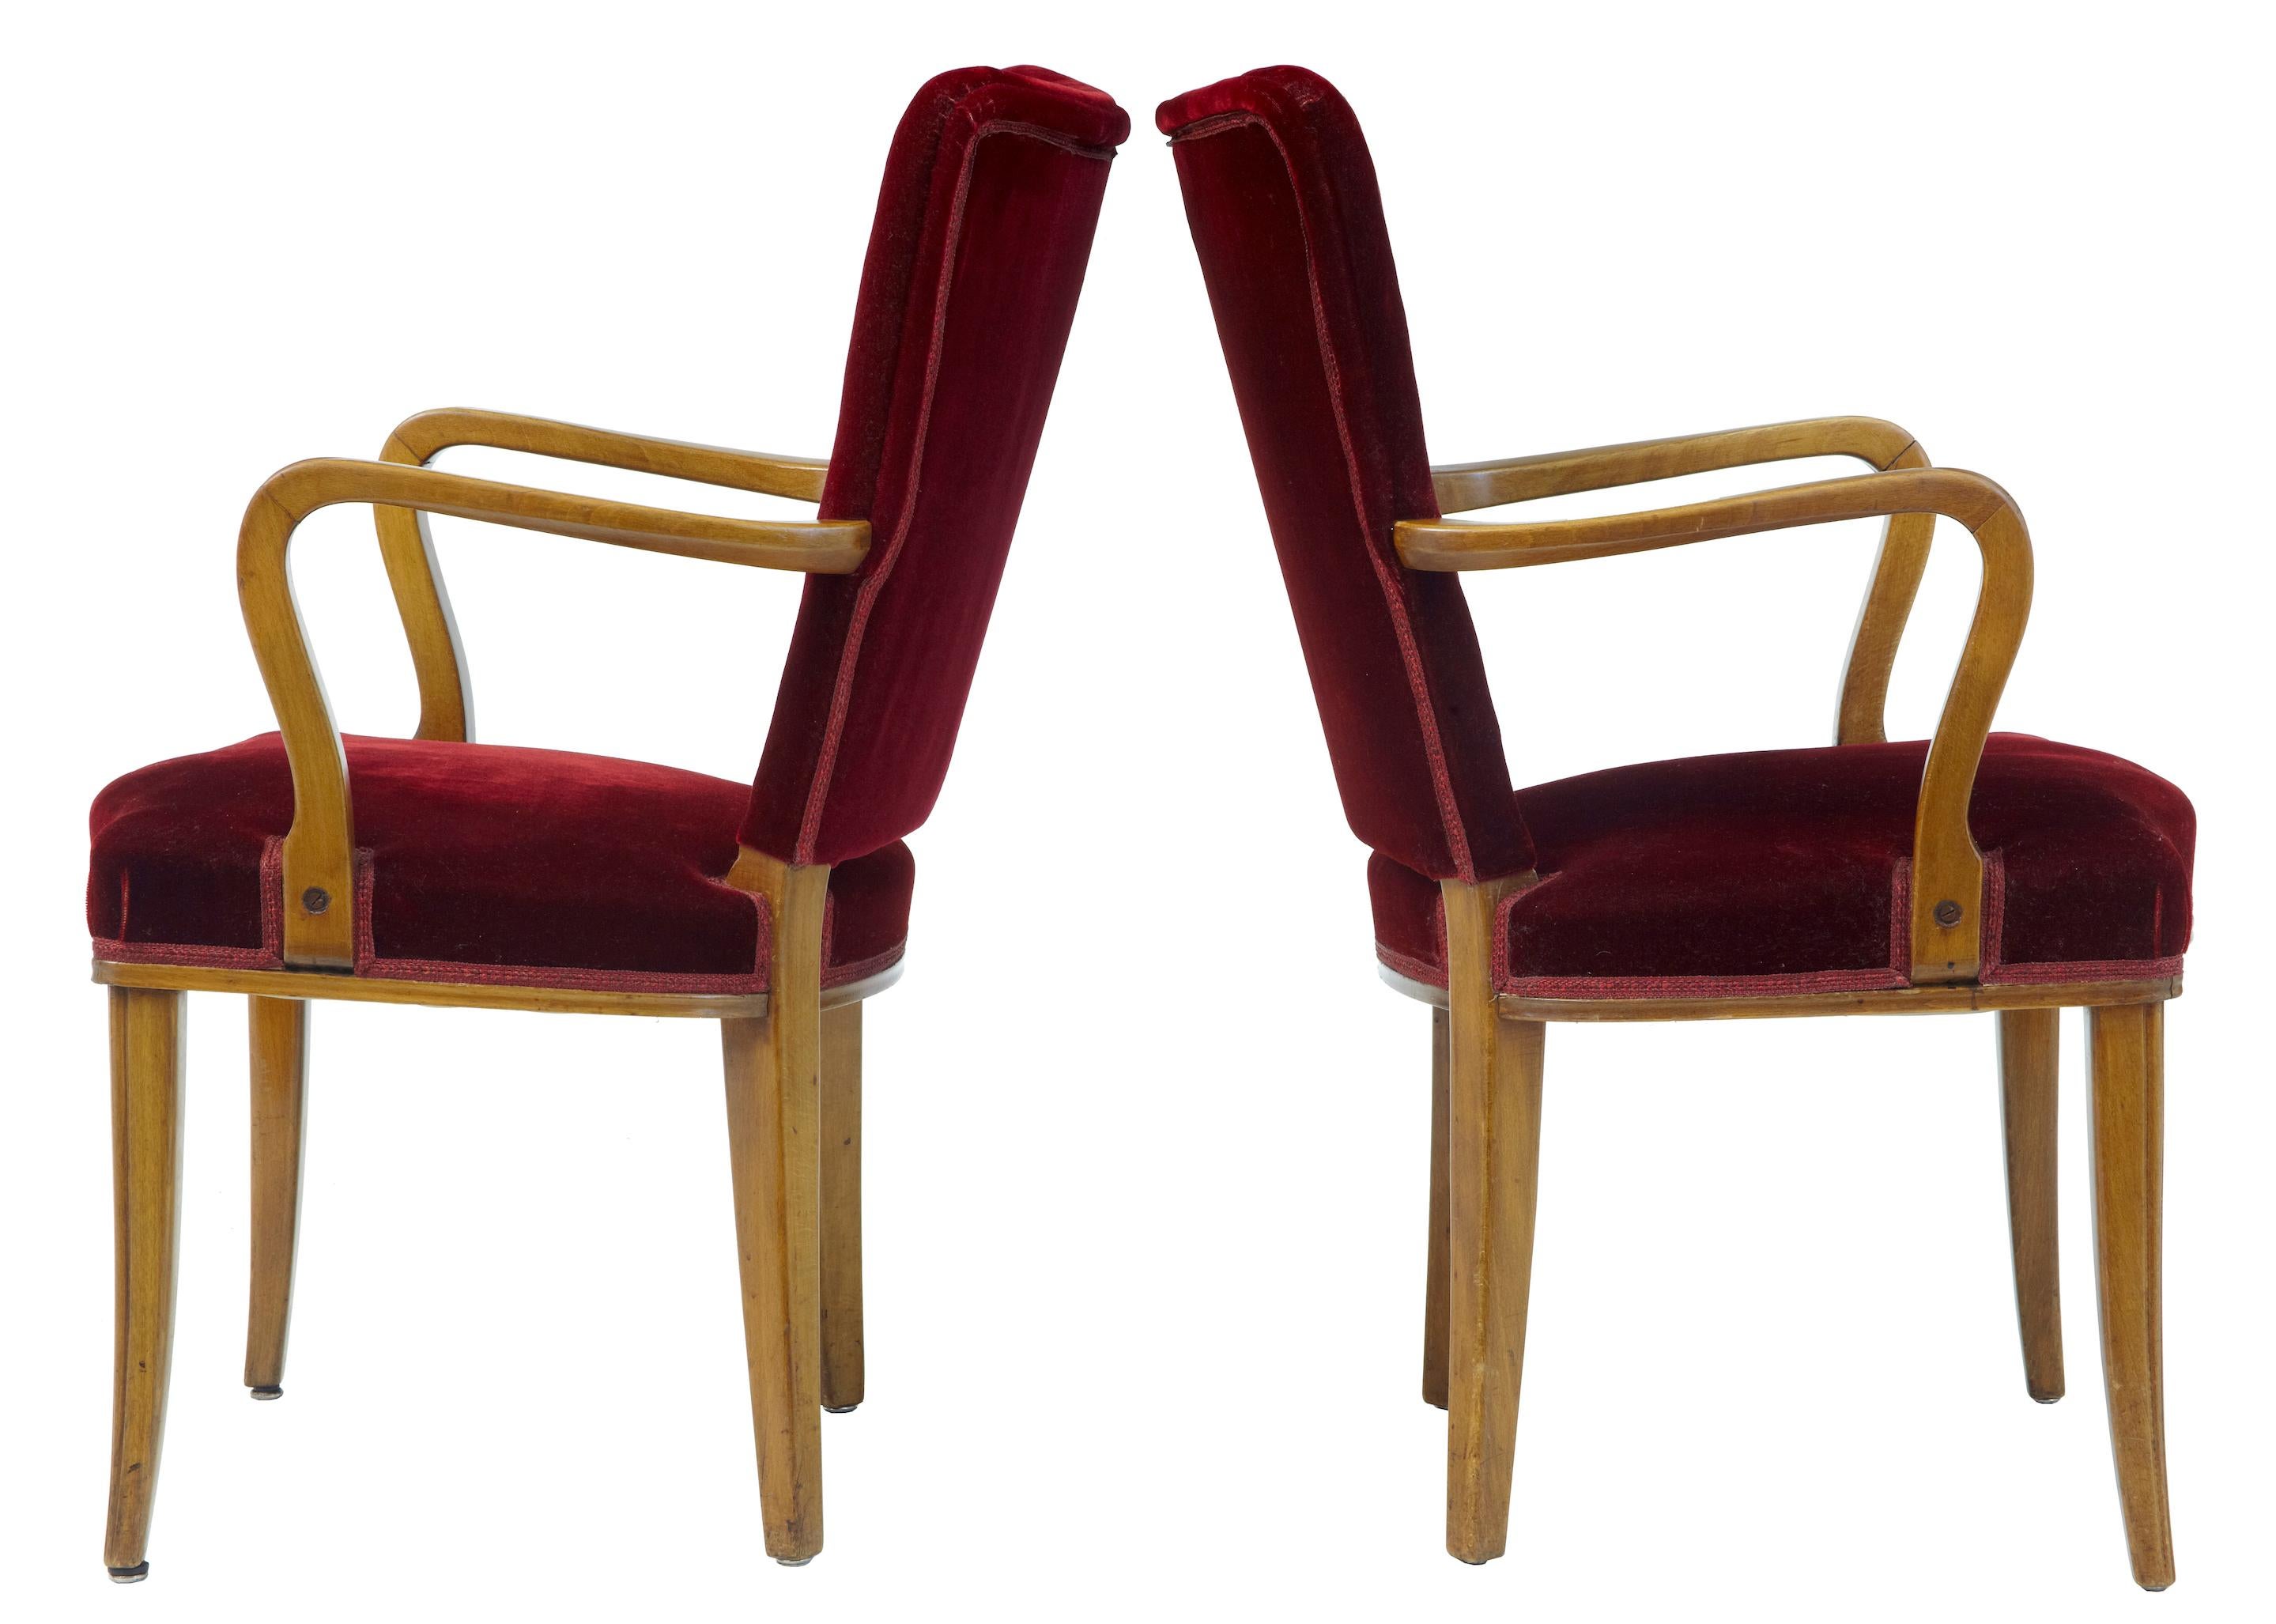 Pair of Scandinavian club armchairs, circa 1950.
Open birch arm, richly upholstered in red velvet. Some minor wear to velvet but in good usable condition.

Measure: Height 35